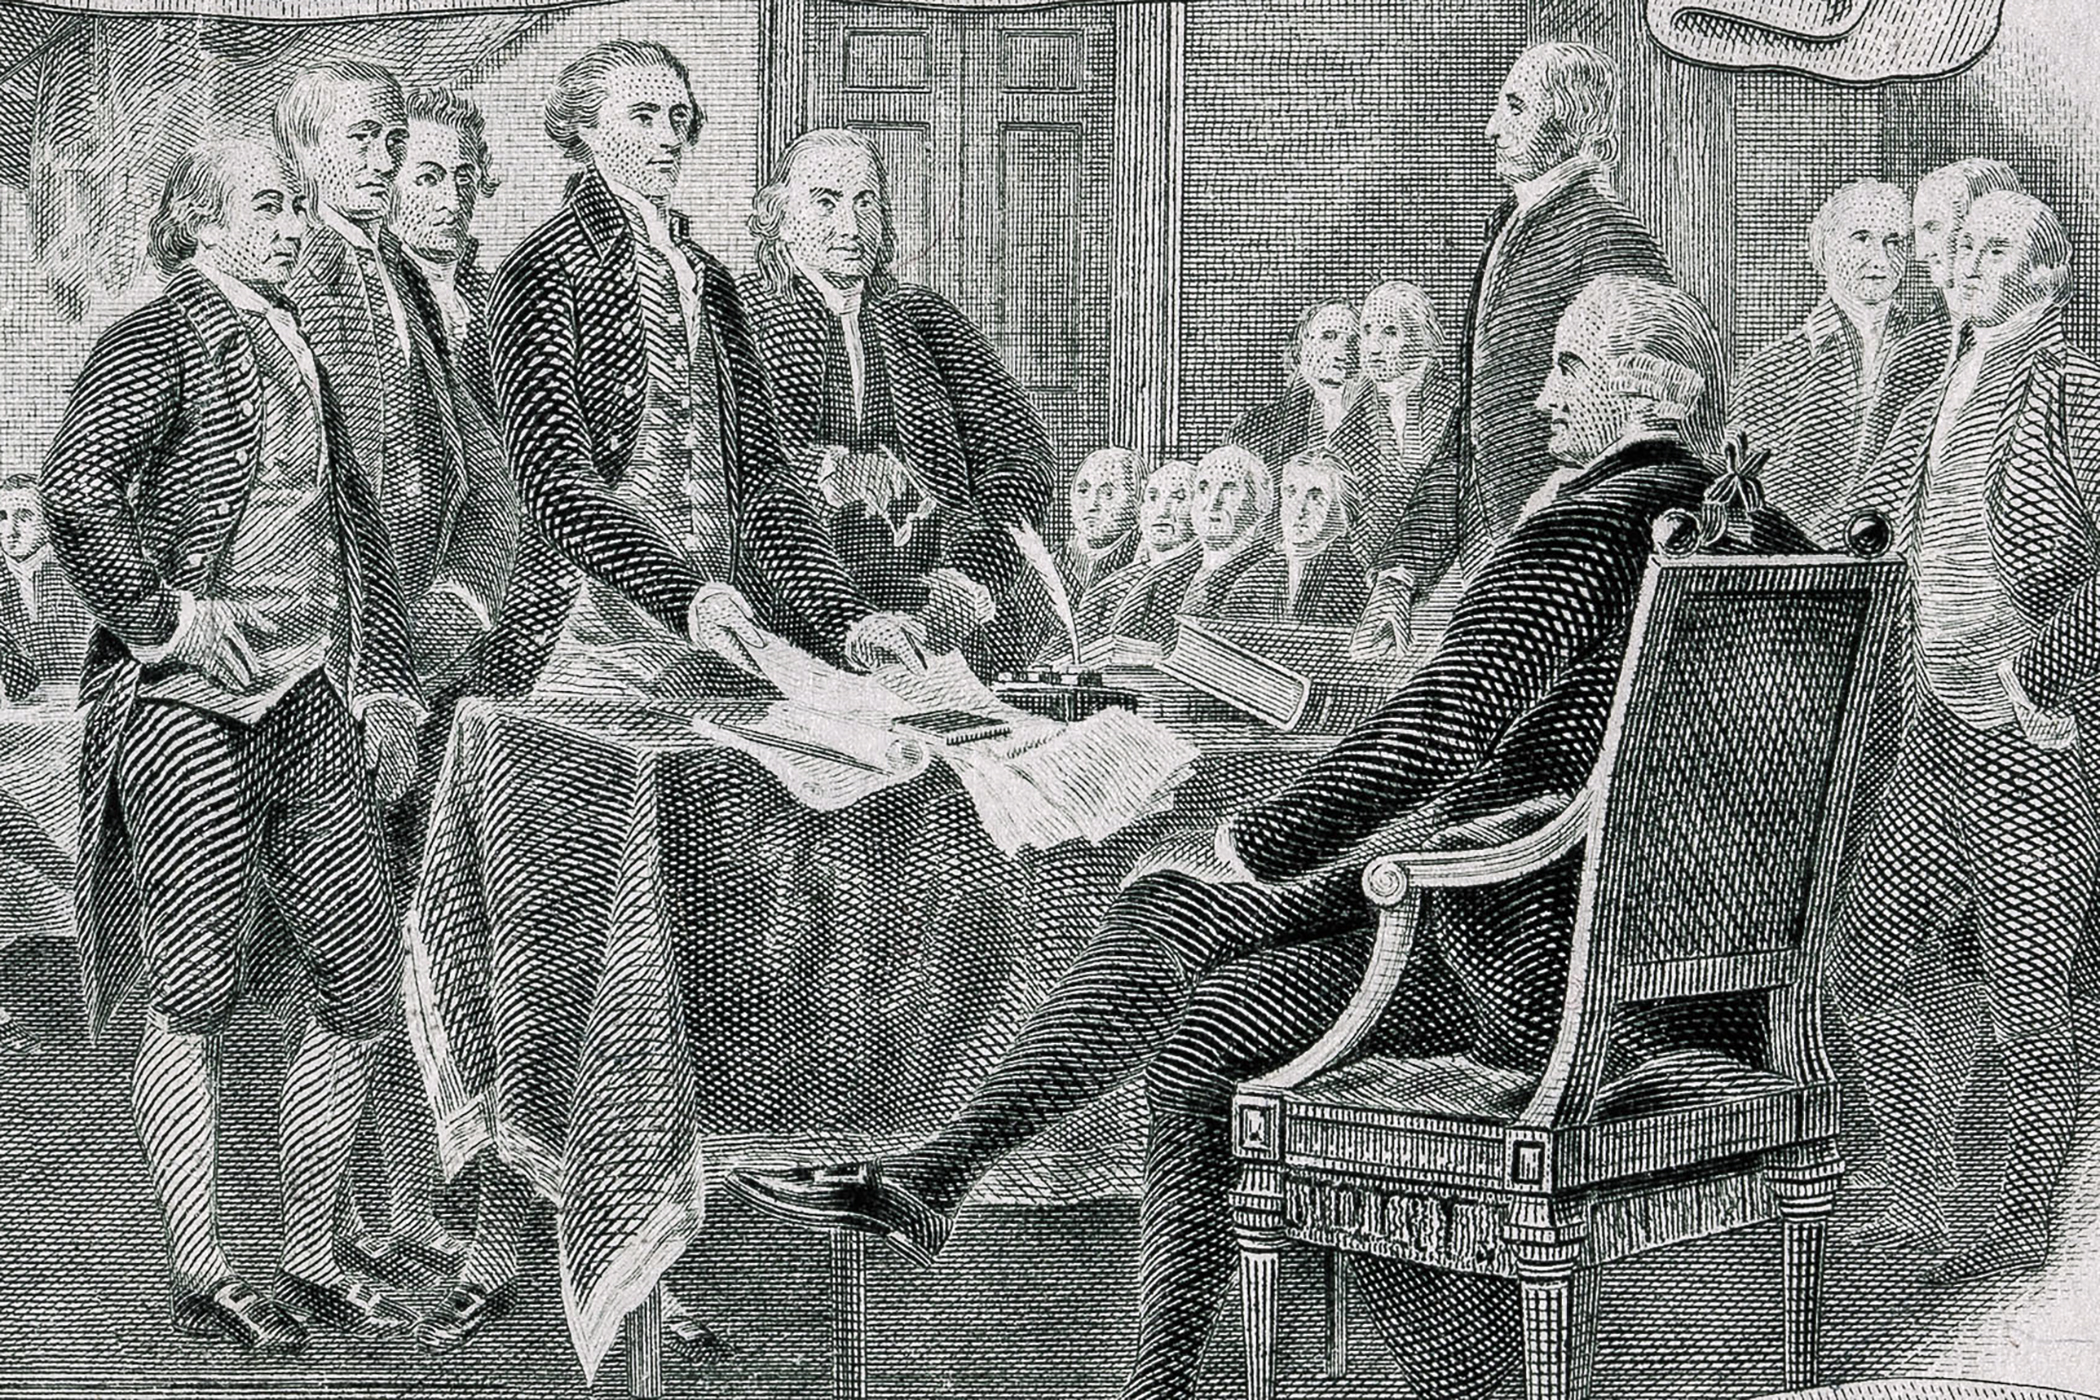 Founding Fathers signing Declaration of Independence on back of $2 bill